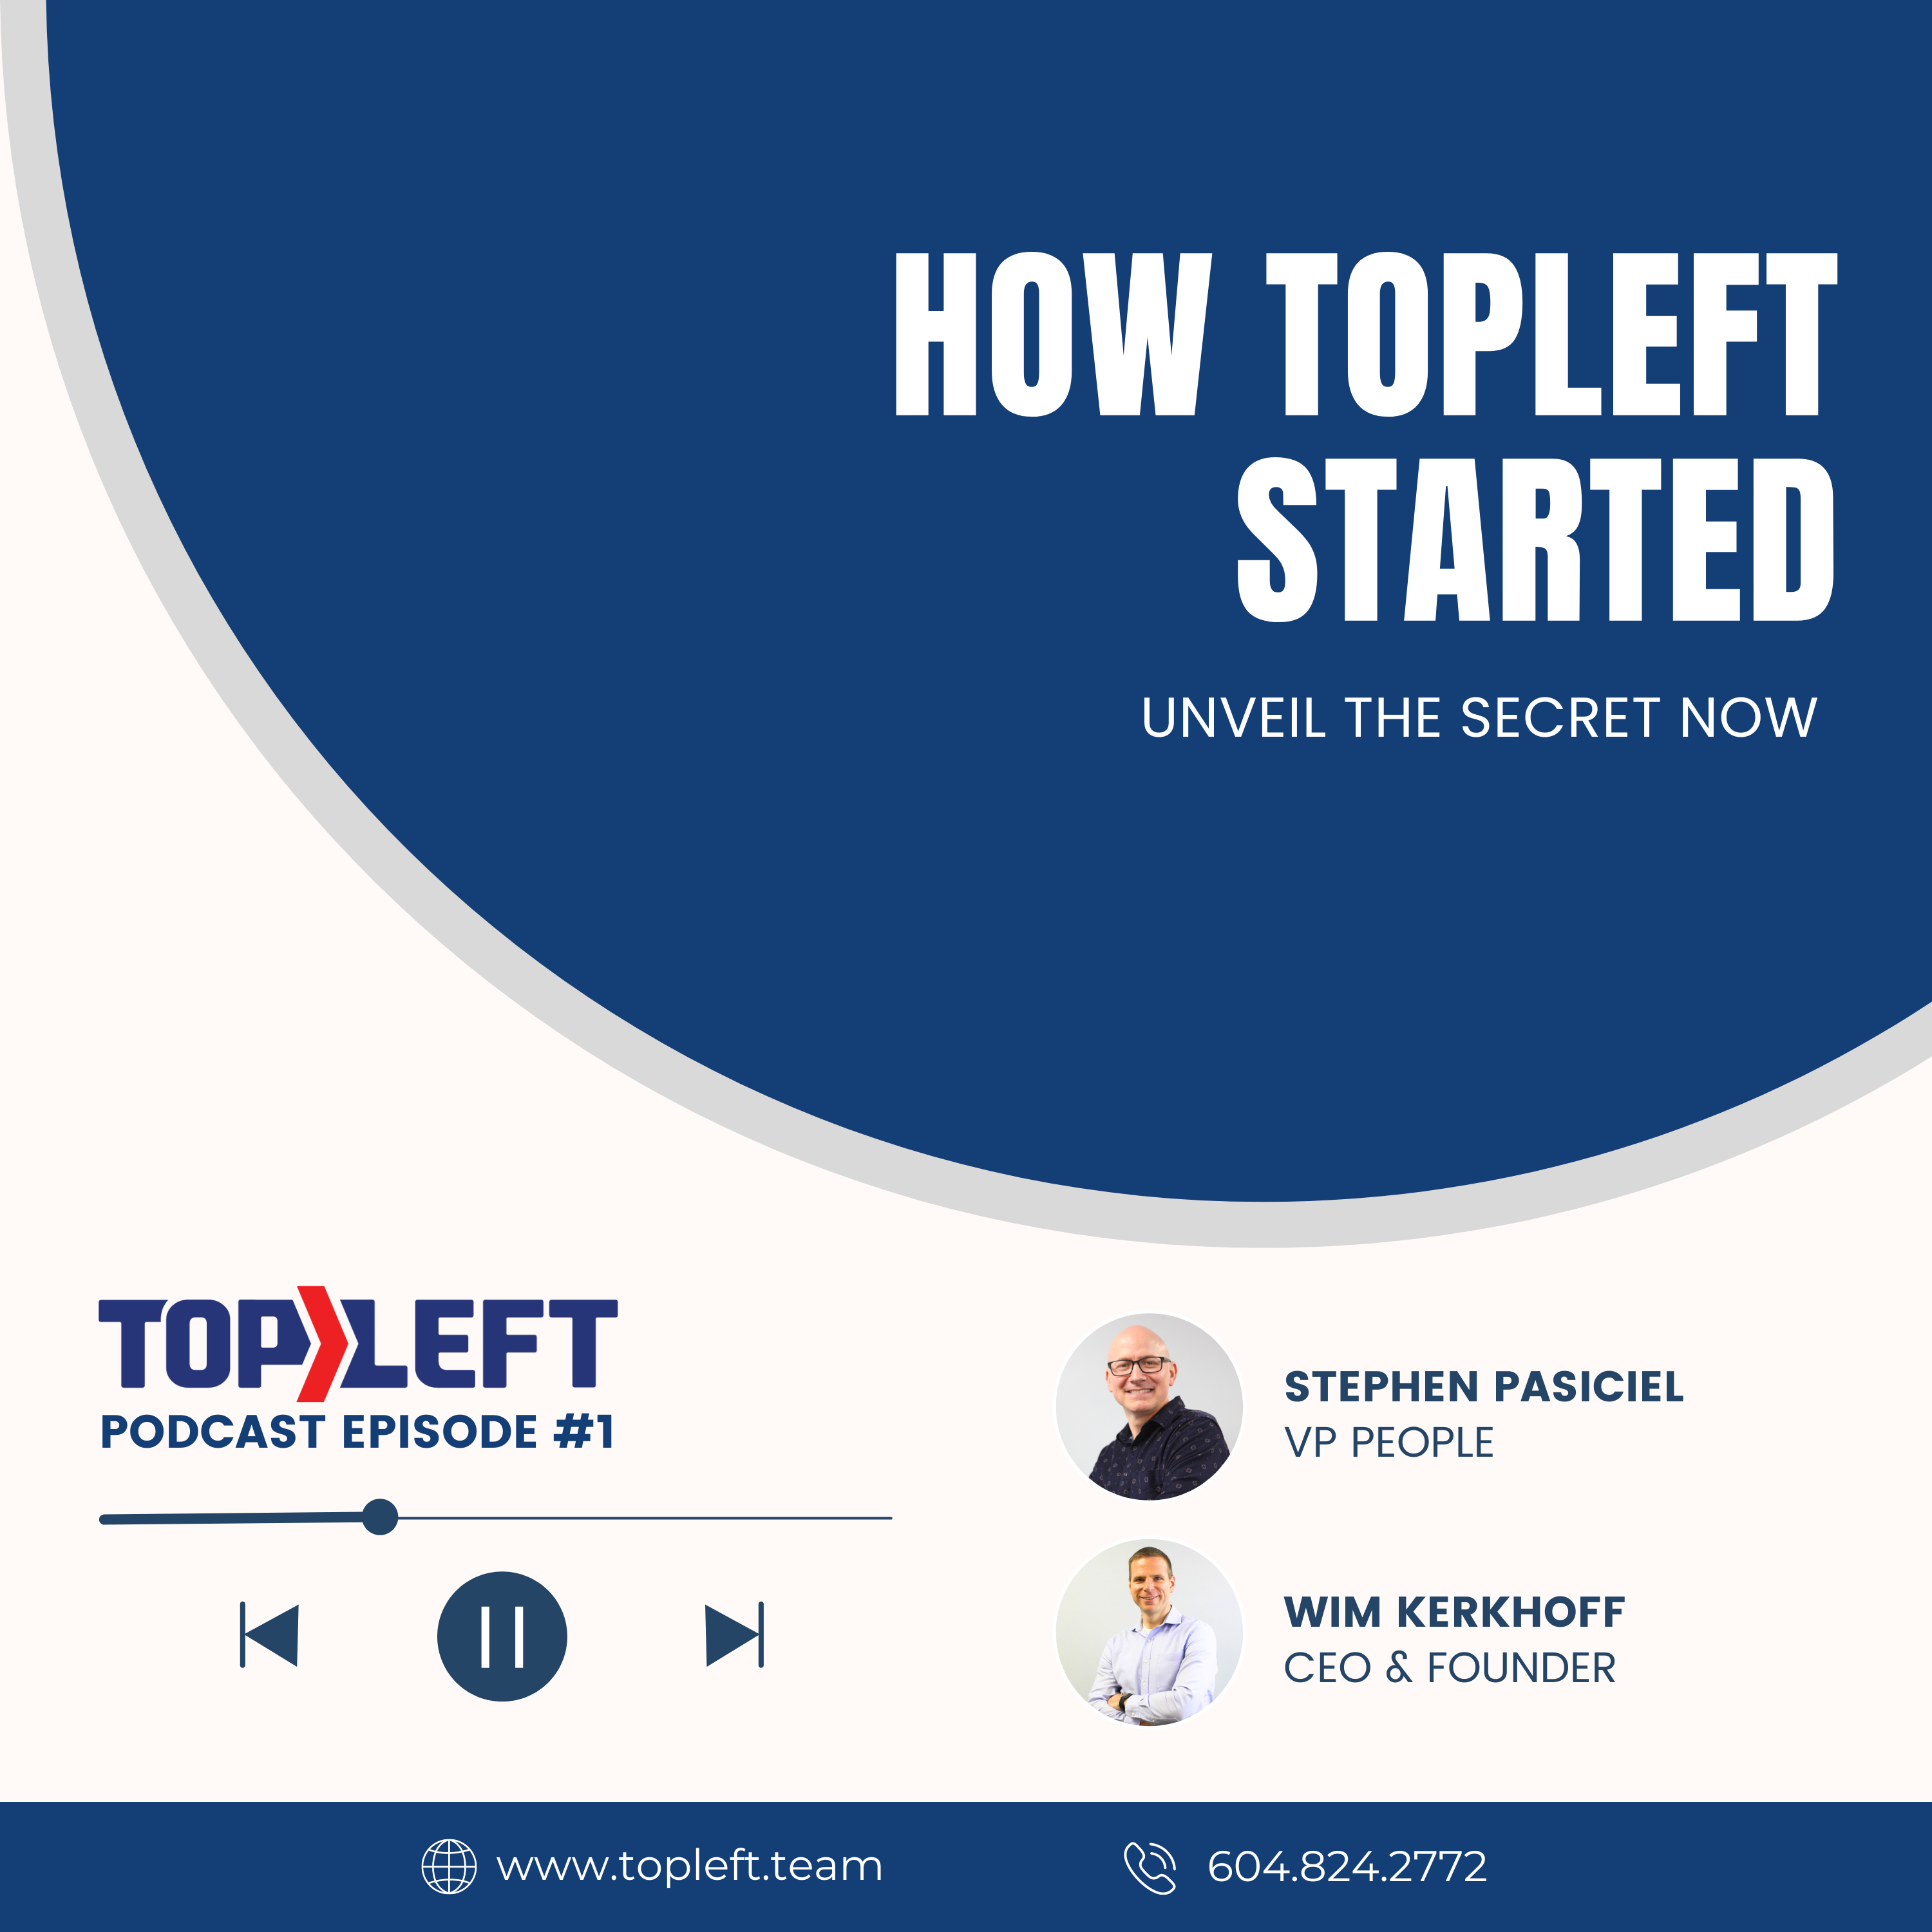 Podcast Ep 1 | How TopLeft Started